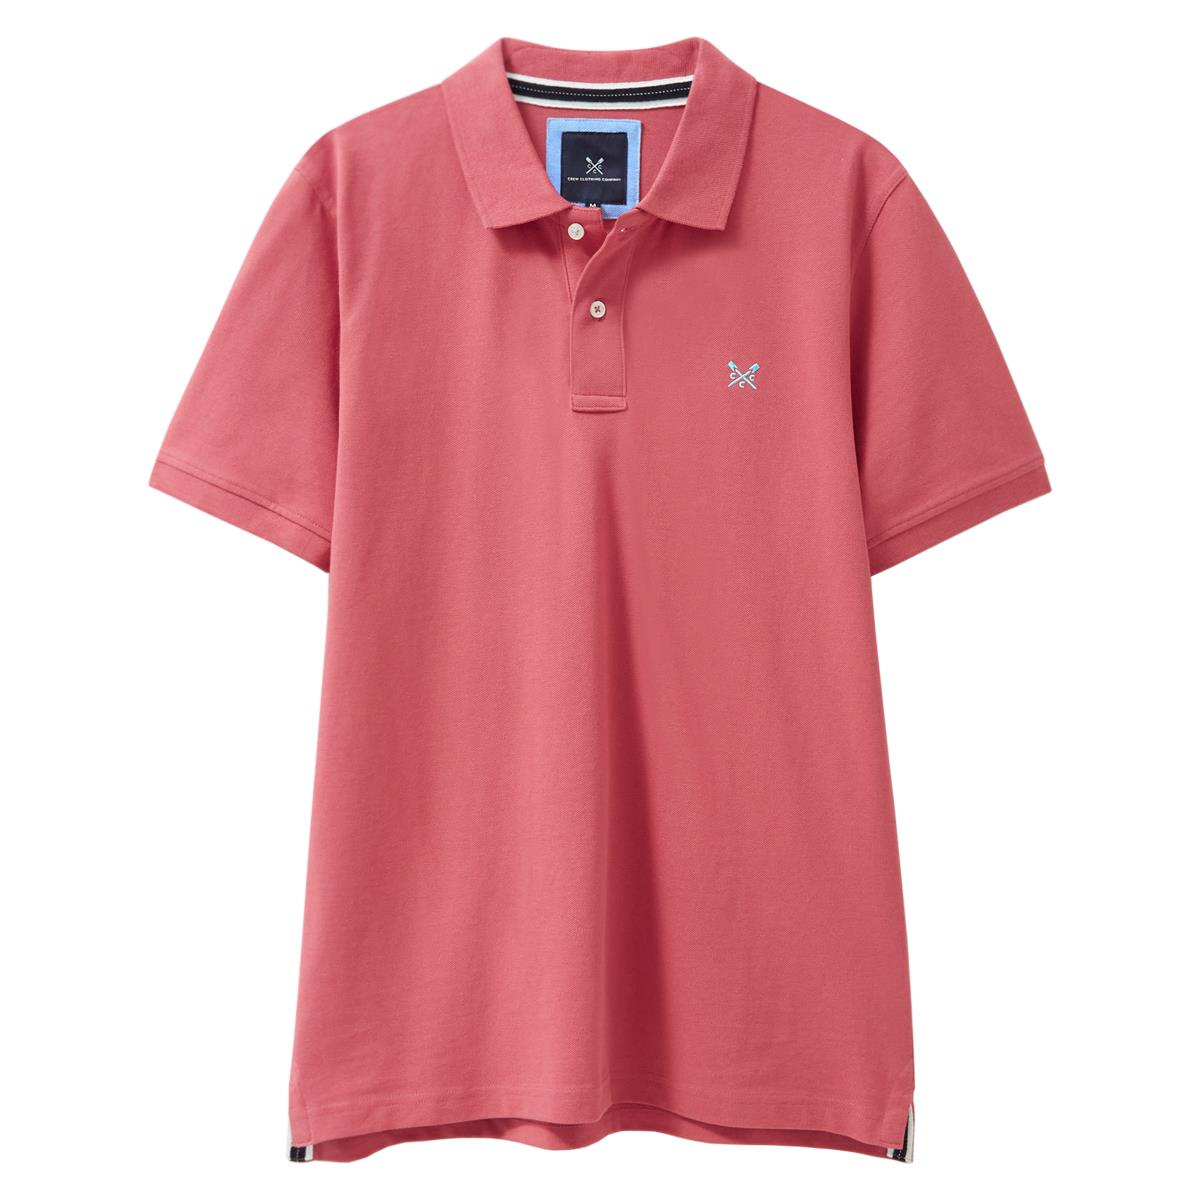 What colors are offered in the Crew Clothing Mens Classic Pique Polo Shirt?